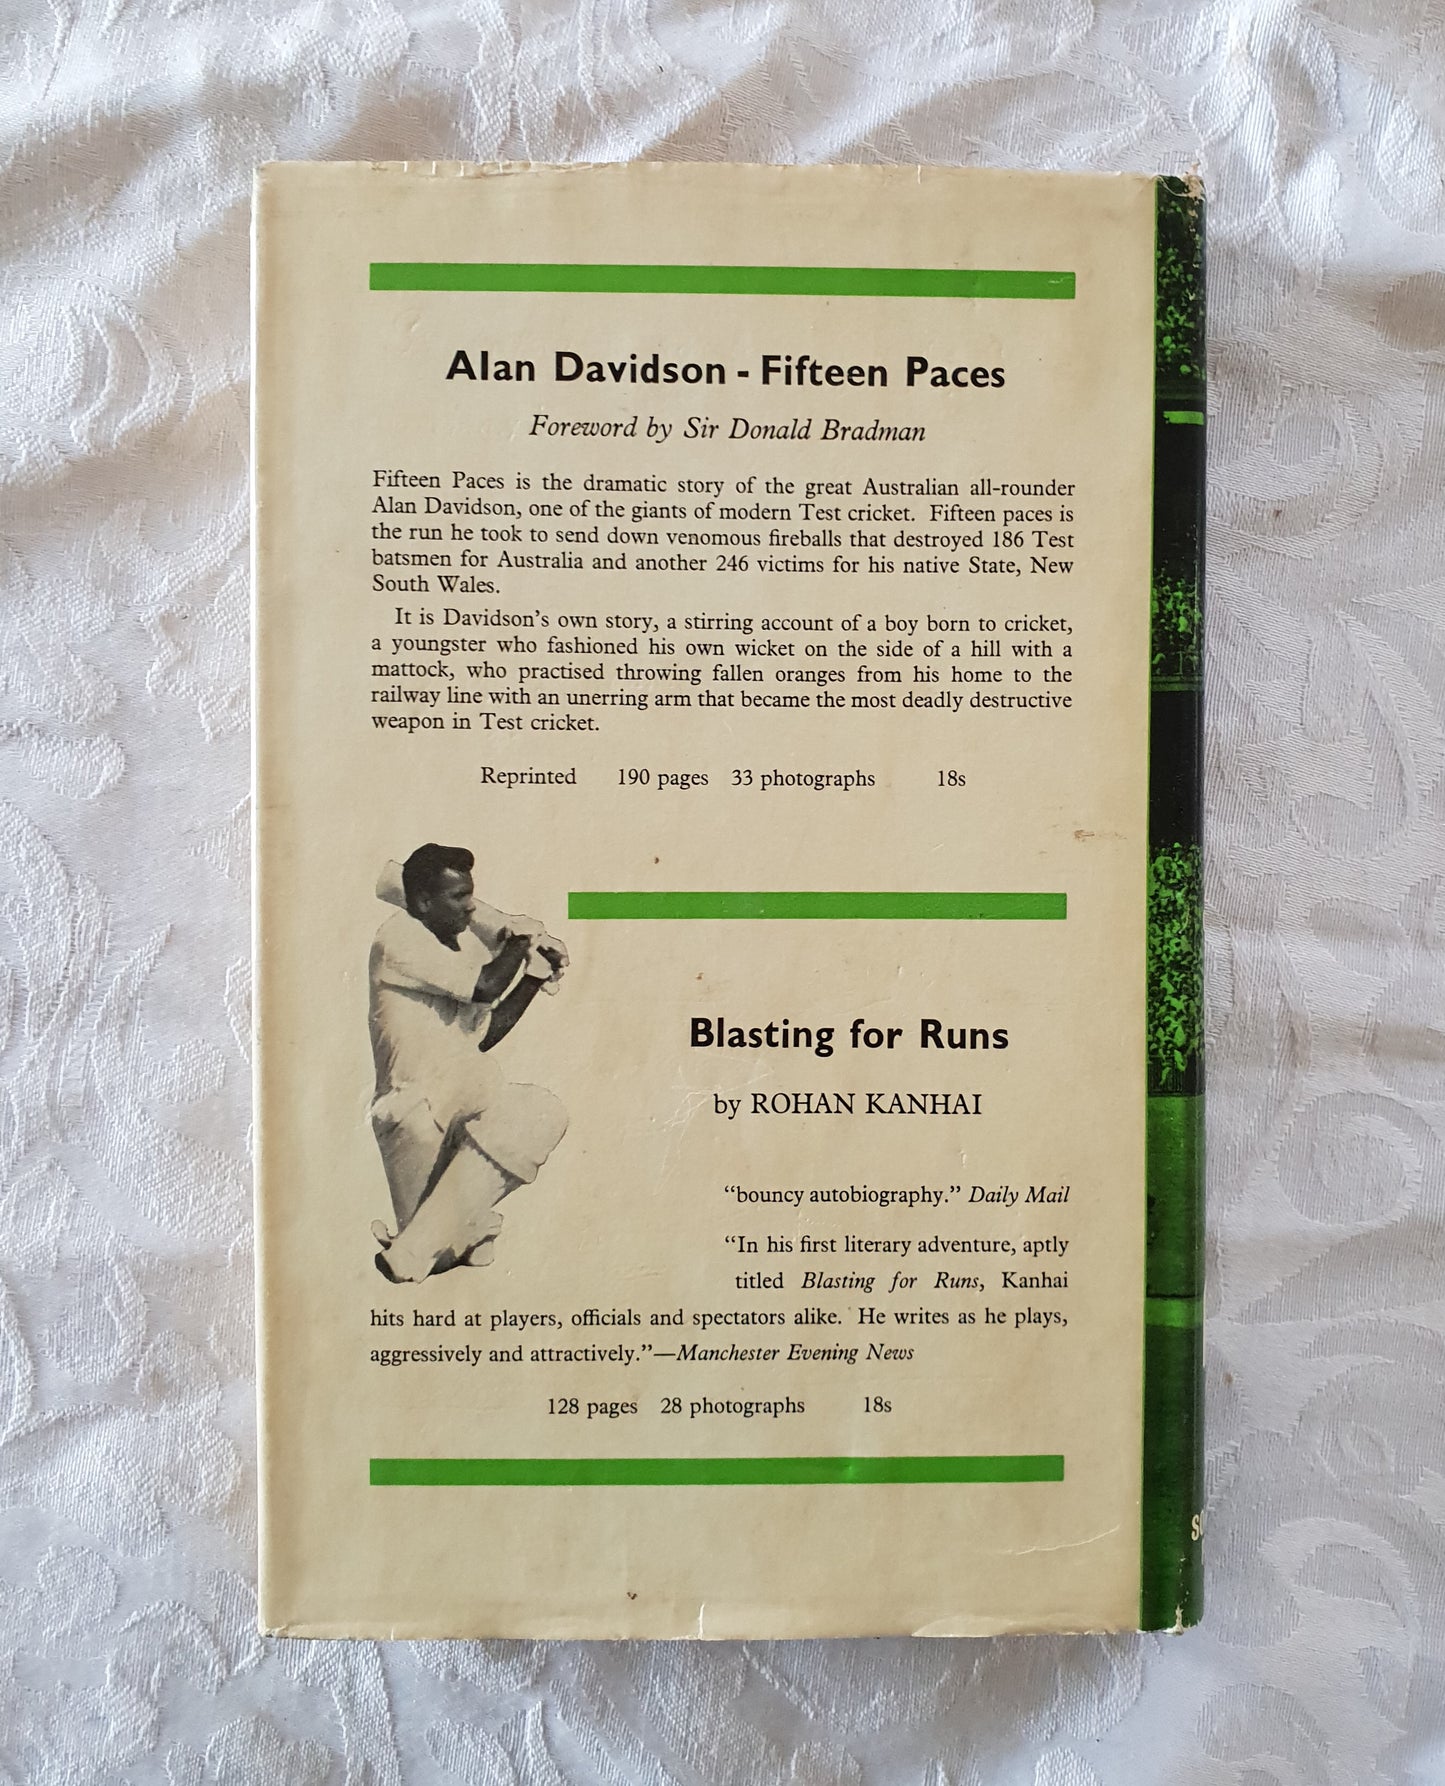 His Own Story Run-Digger by Bill Lawry